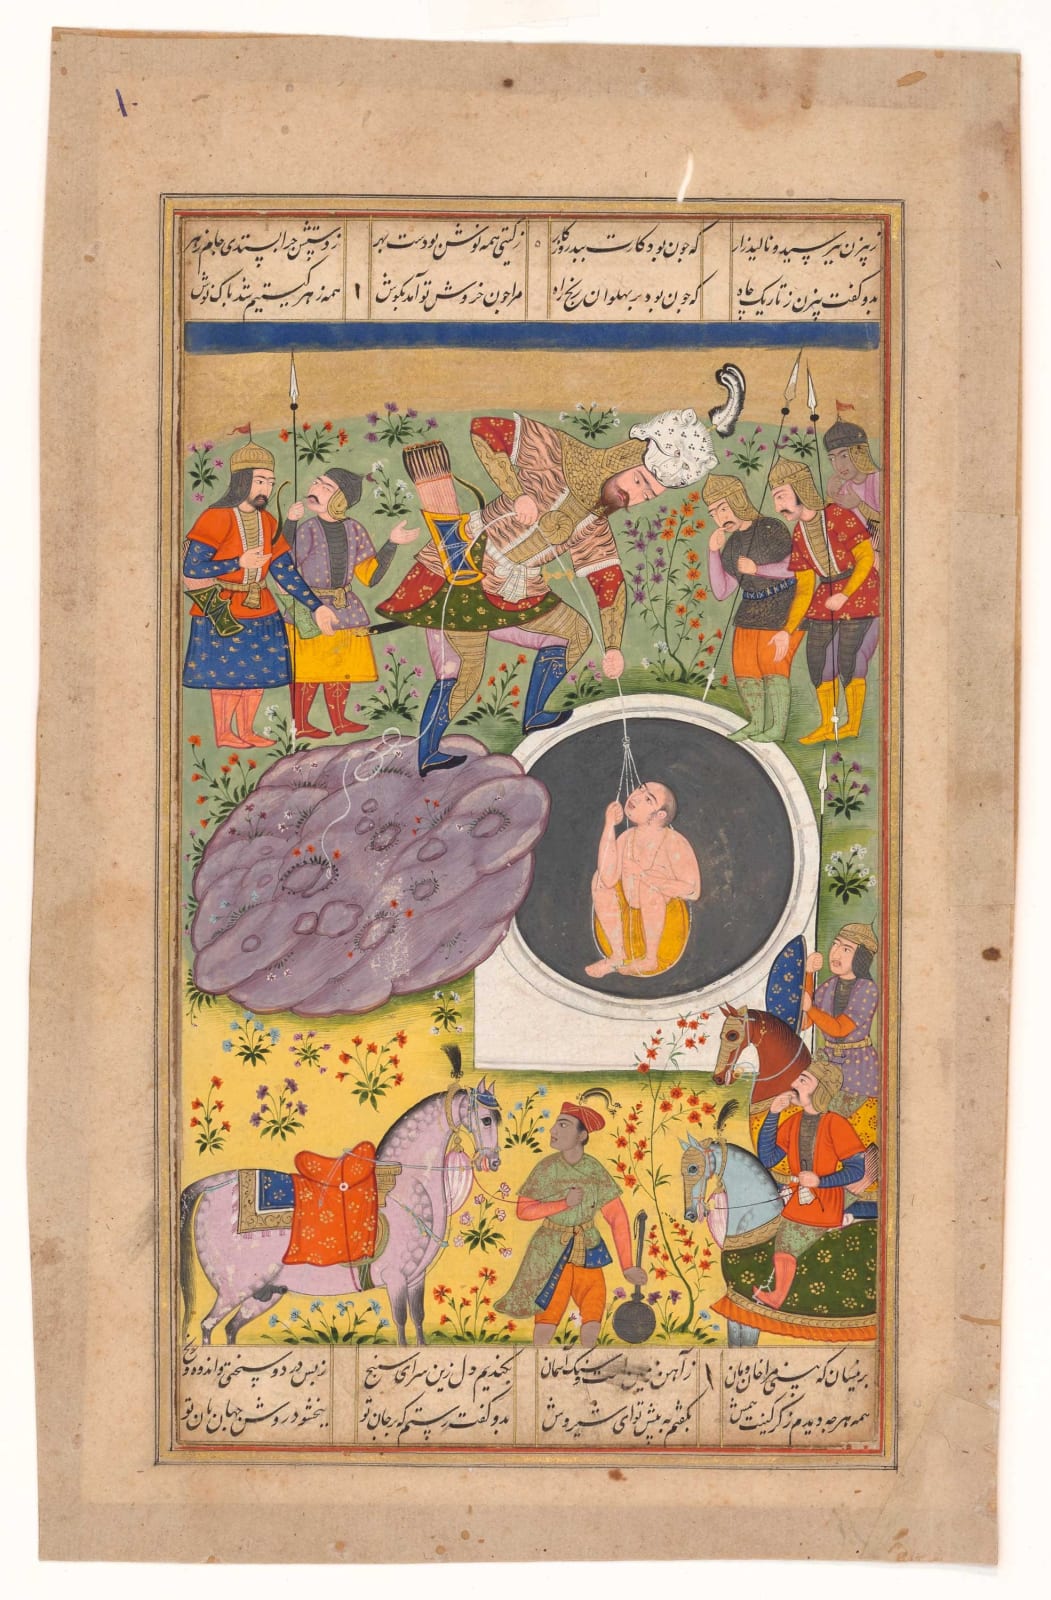 Rustam rescues Bizhan from the well: Folio from the Shahnama of Firdawsi, Sub-Imperial Mughal, c. 1605-1620